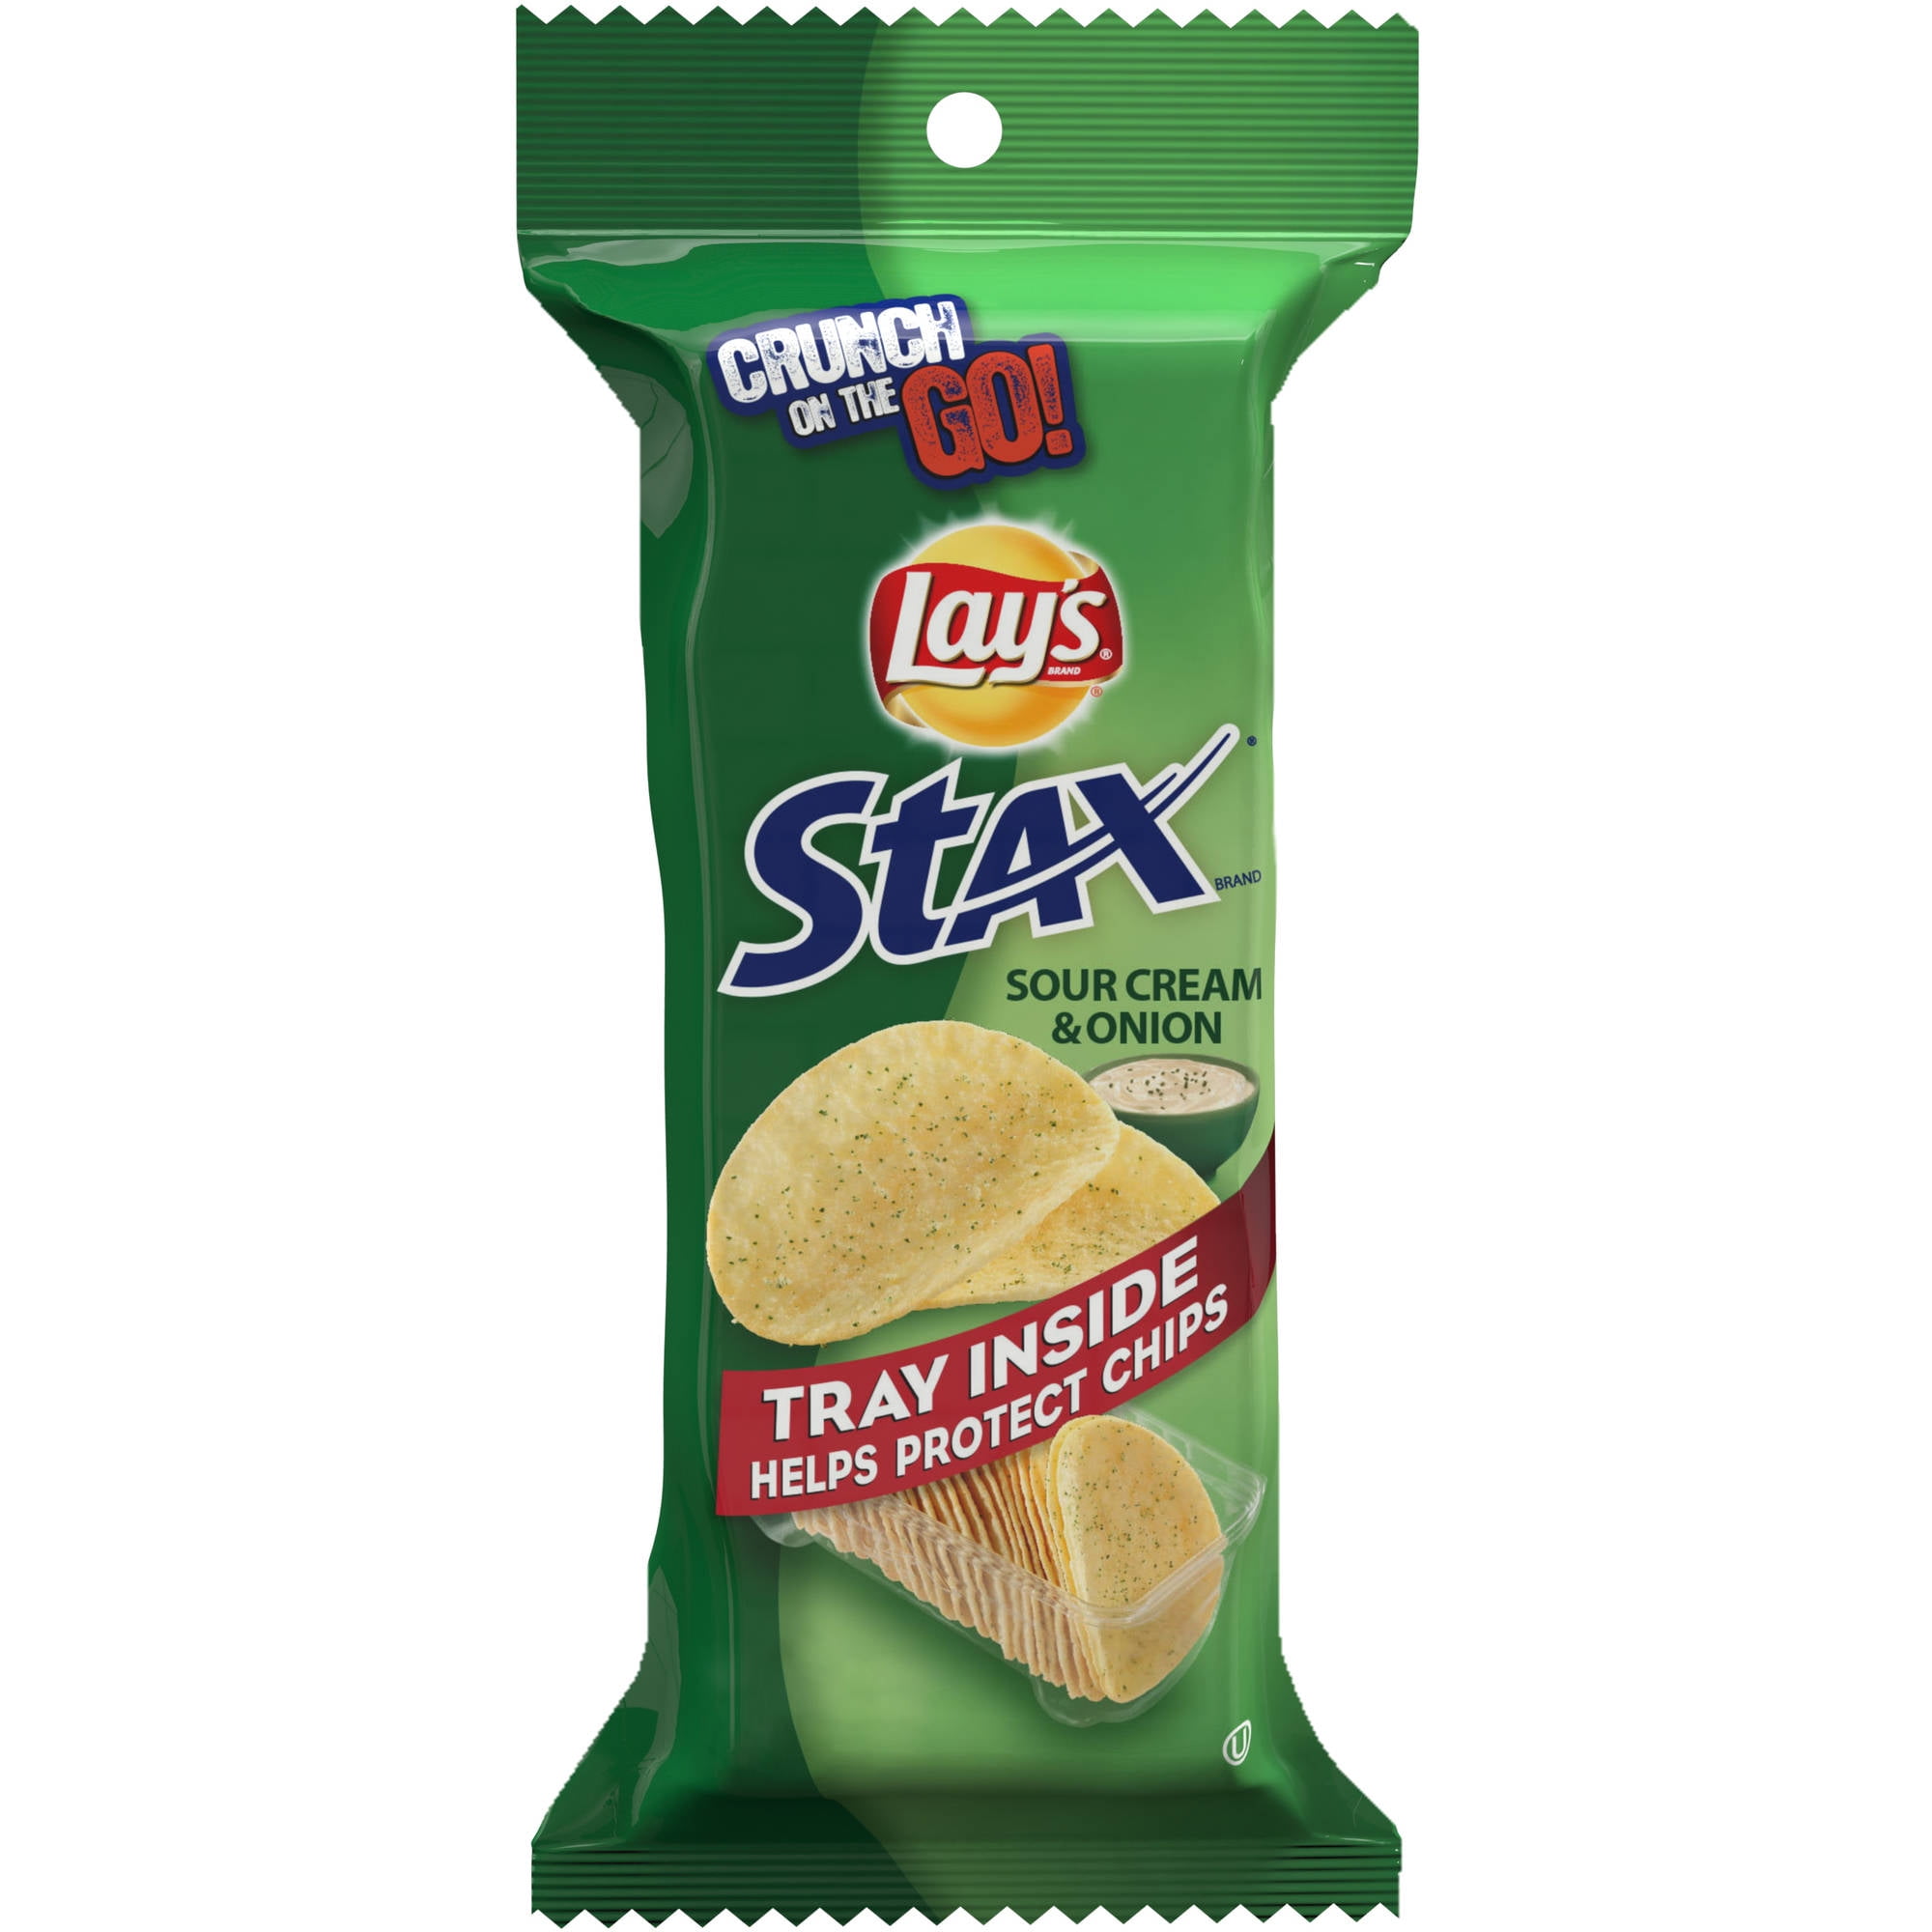 Wash out an empty Lays Stax chip container and save your paint